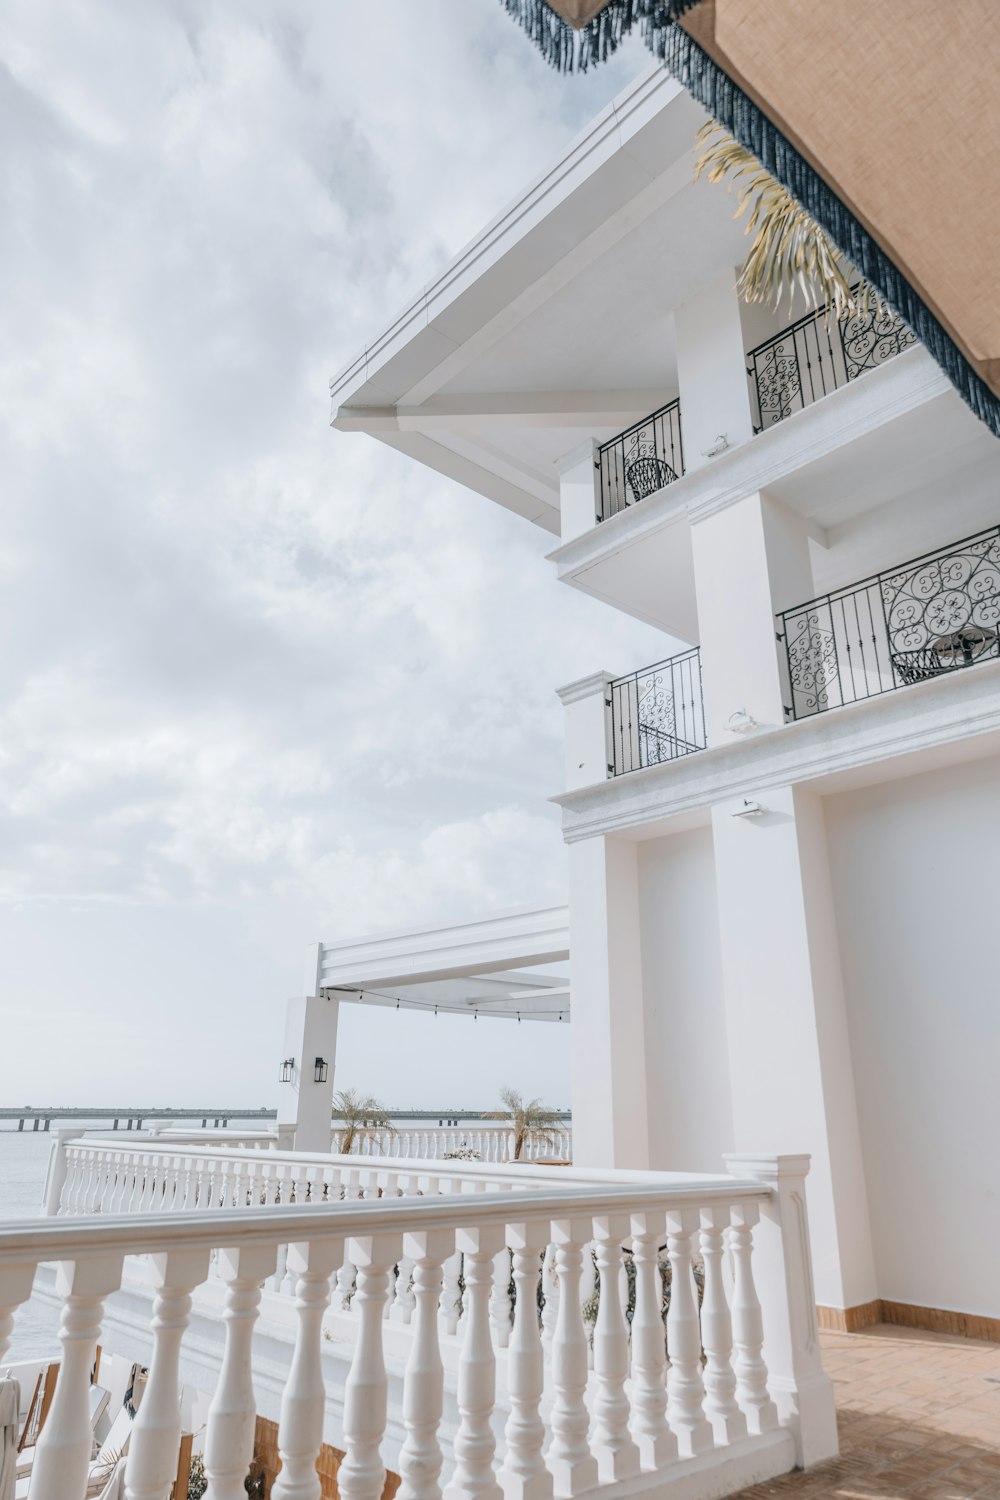 a balcony overlooking the ocean and a building with balconies